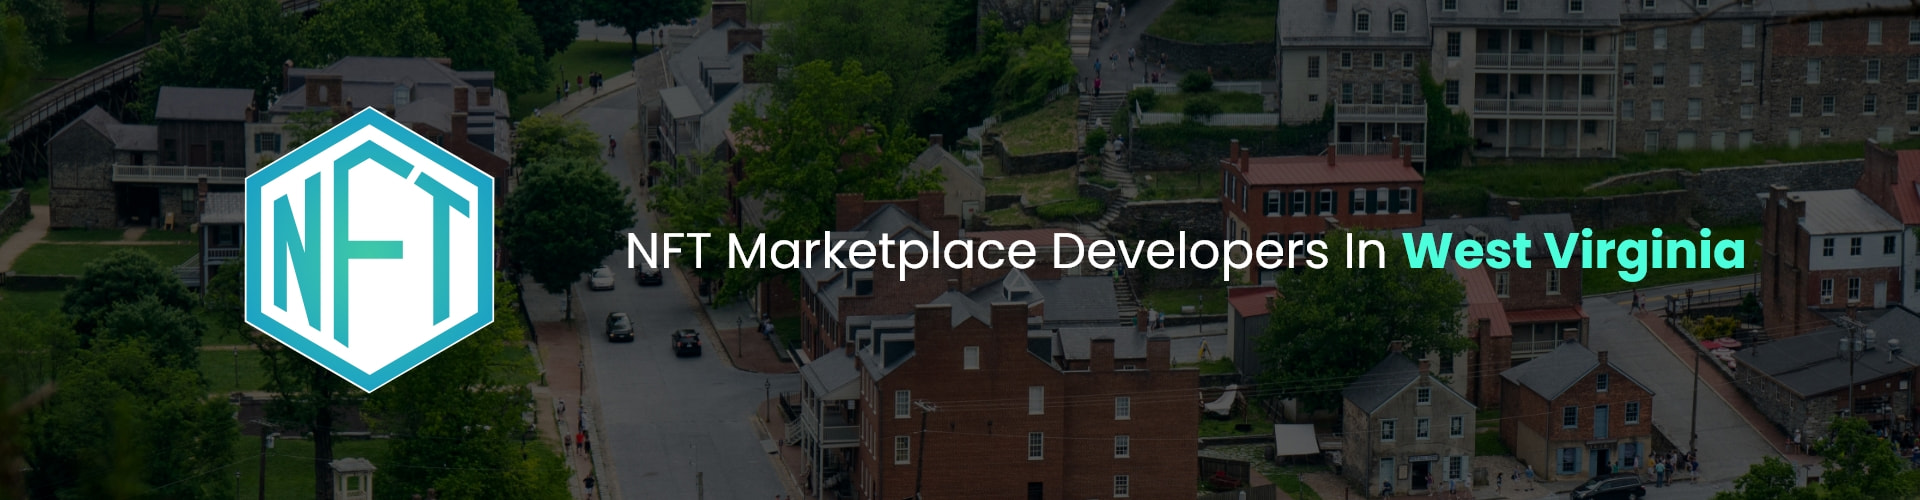 hire nft marketplace developers in west virginia